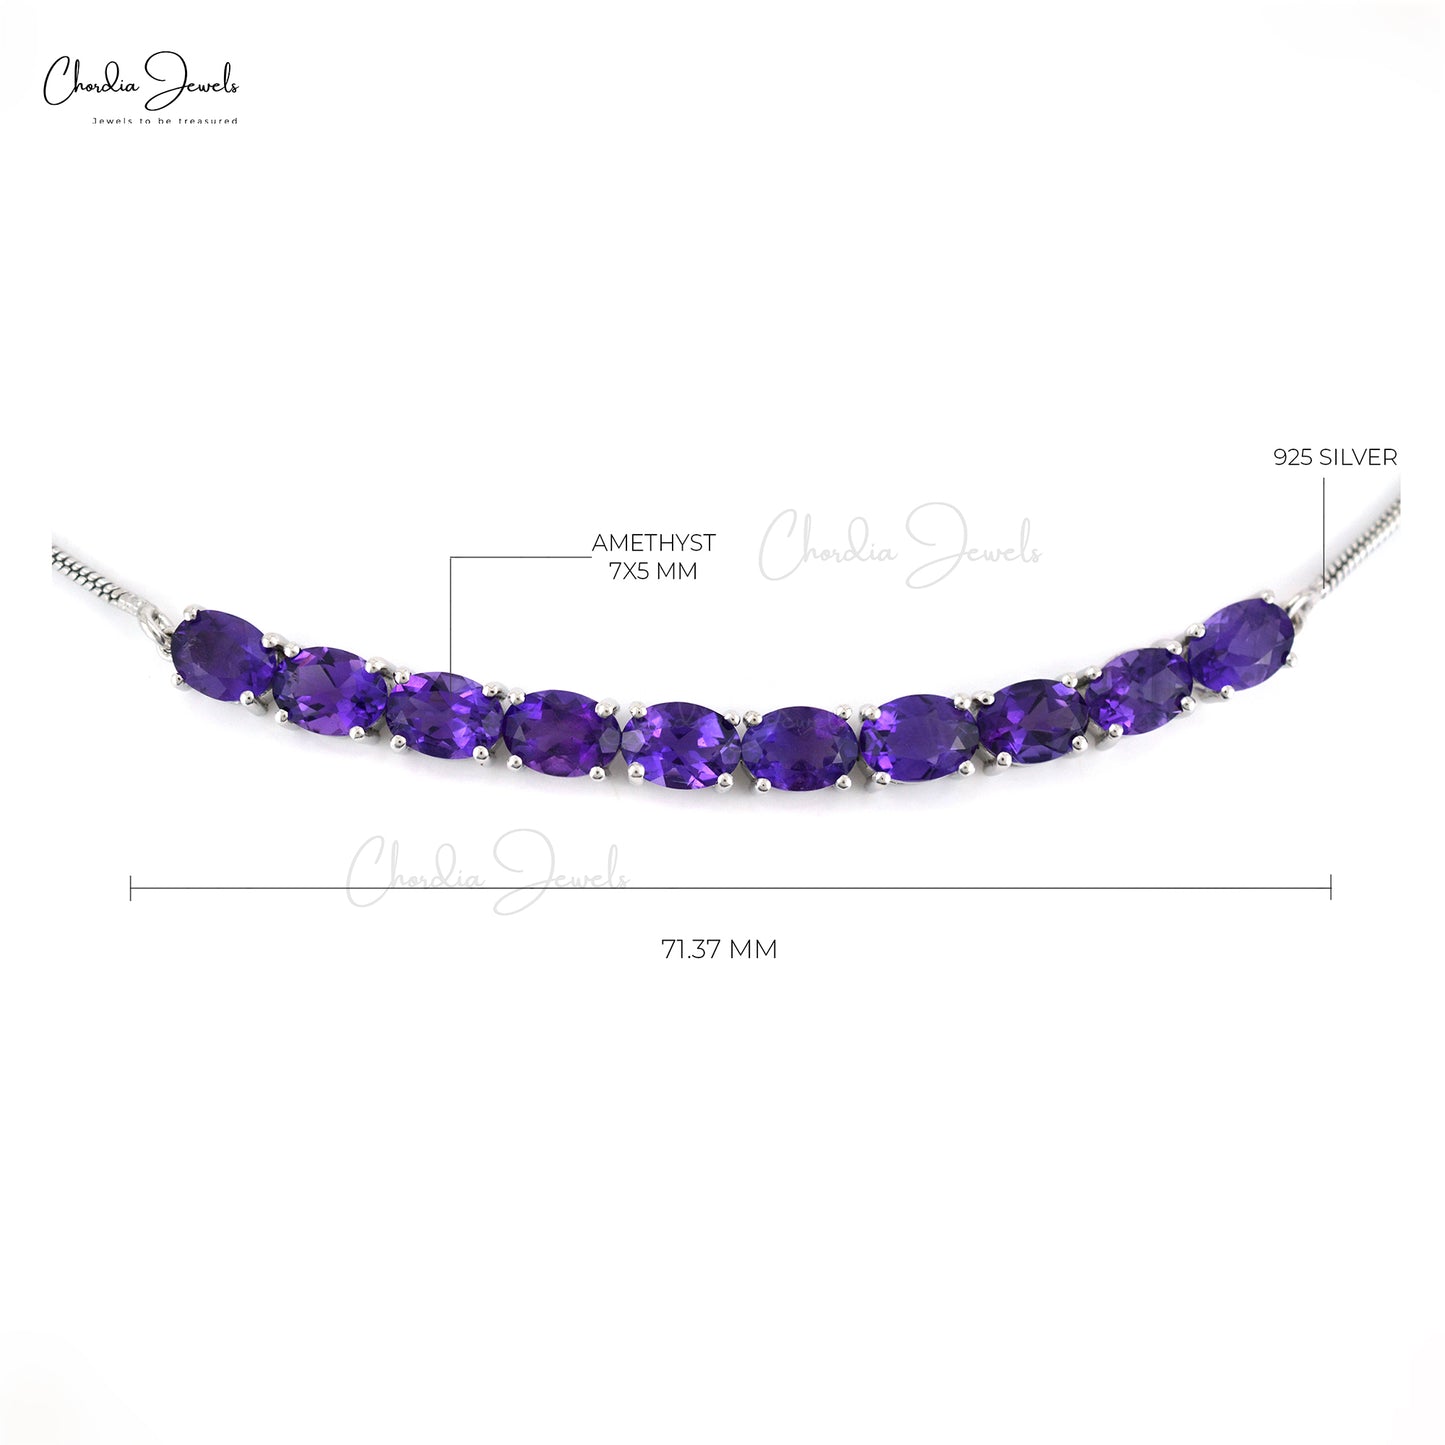 Load image into Gallery viewer, Beautiful Genuine Amethyst Bracelet In 925 Sterling Silver Tennis Jewelry Prong Set Trendy Jewelry At Discount Price
